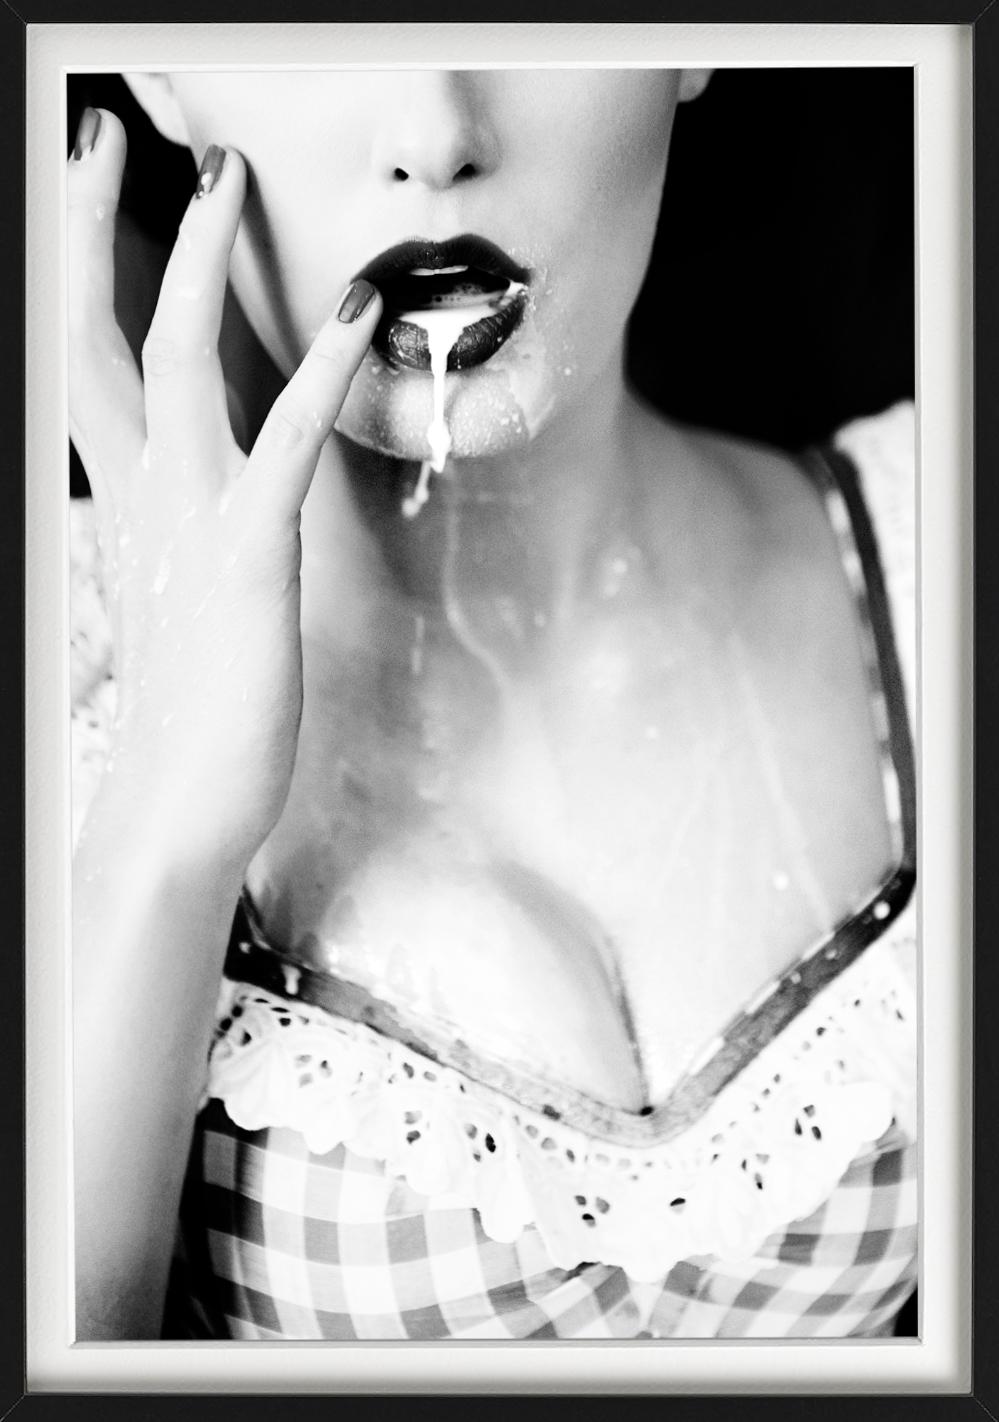 Thirsty - Milk dripping out of a Model's Mouth, b&w fine art photography, 2015 - Gray Black and White Photograph by Ellen von Unwerth